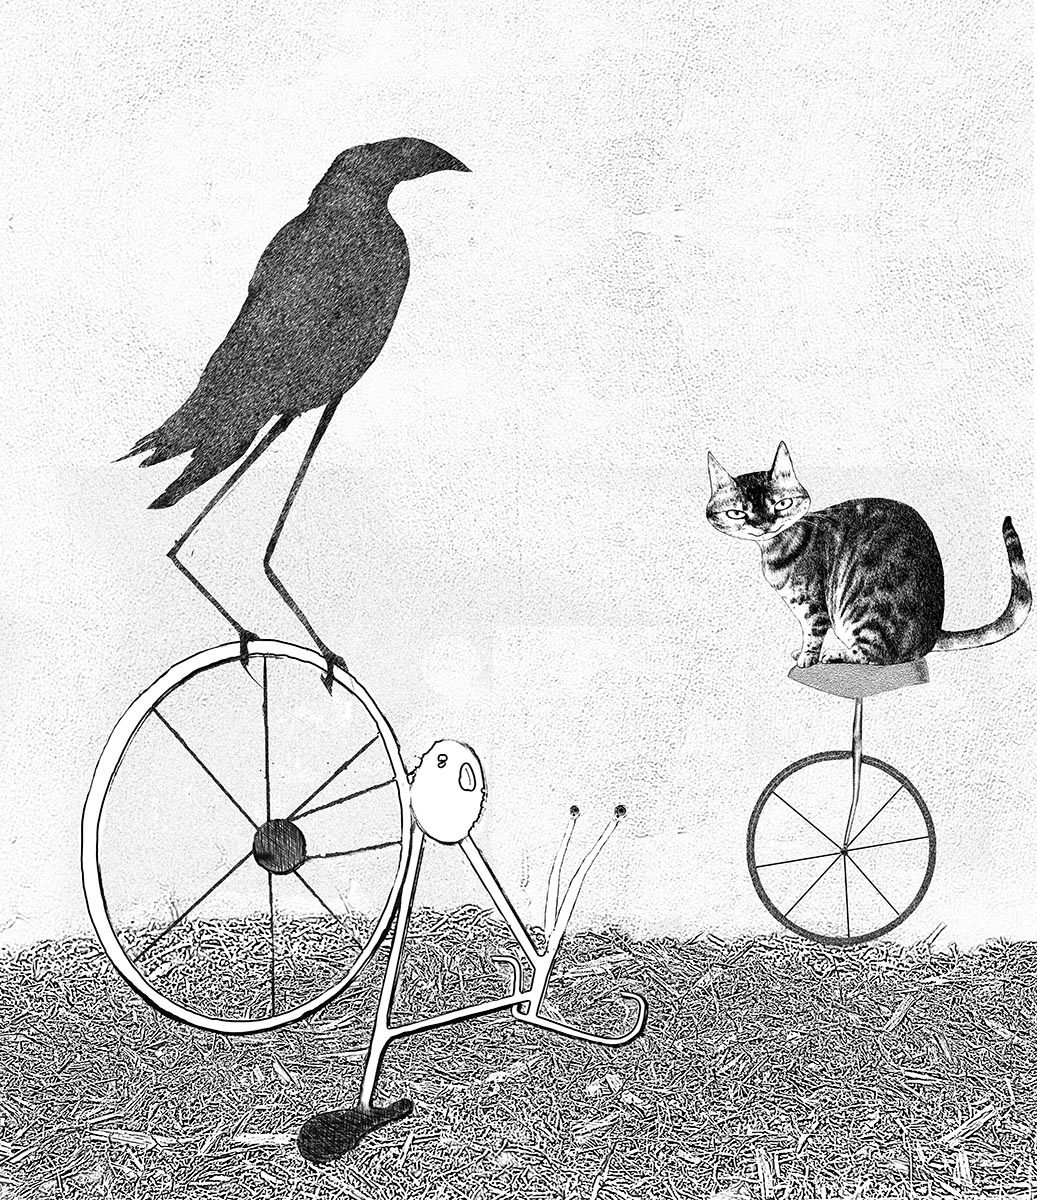 Barry happened upon a Bird on a Bicycle